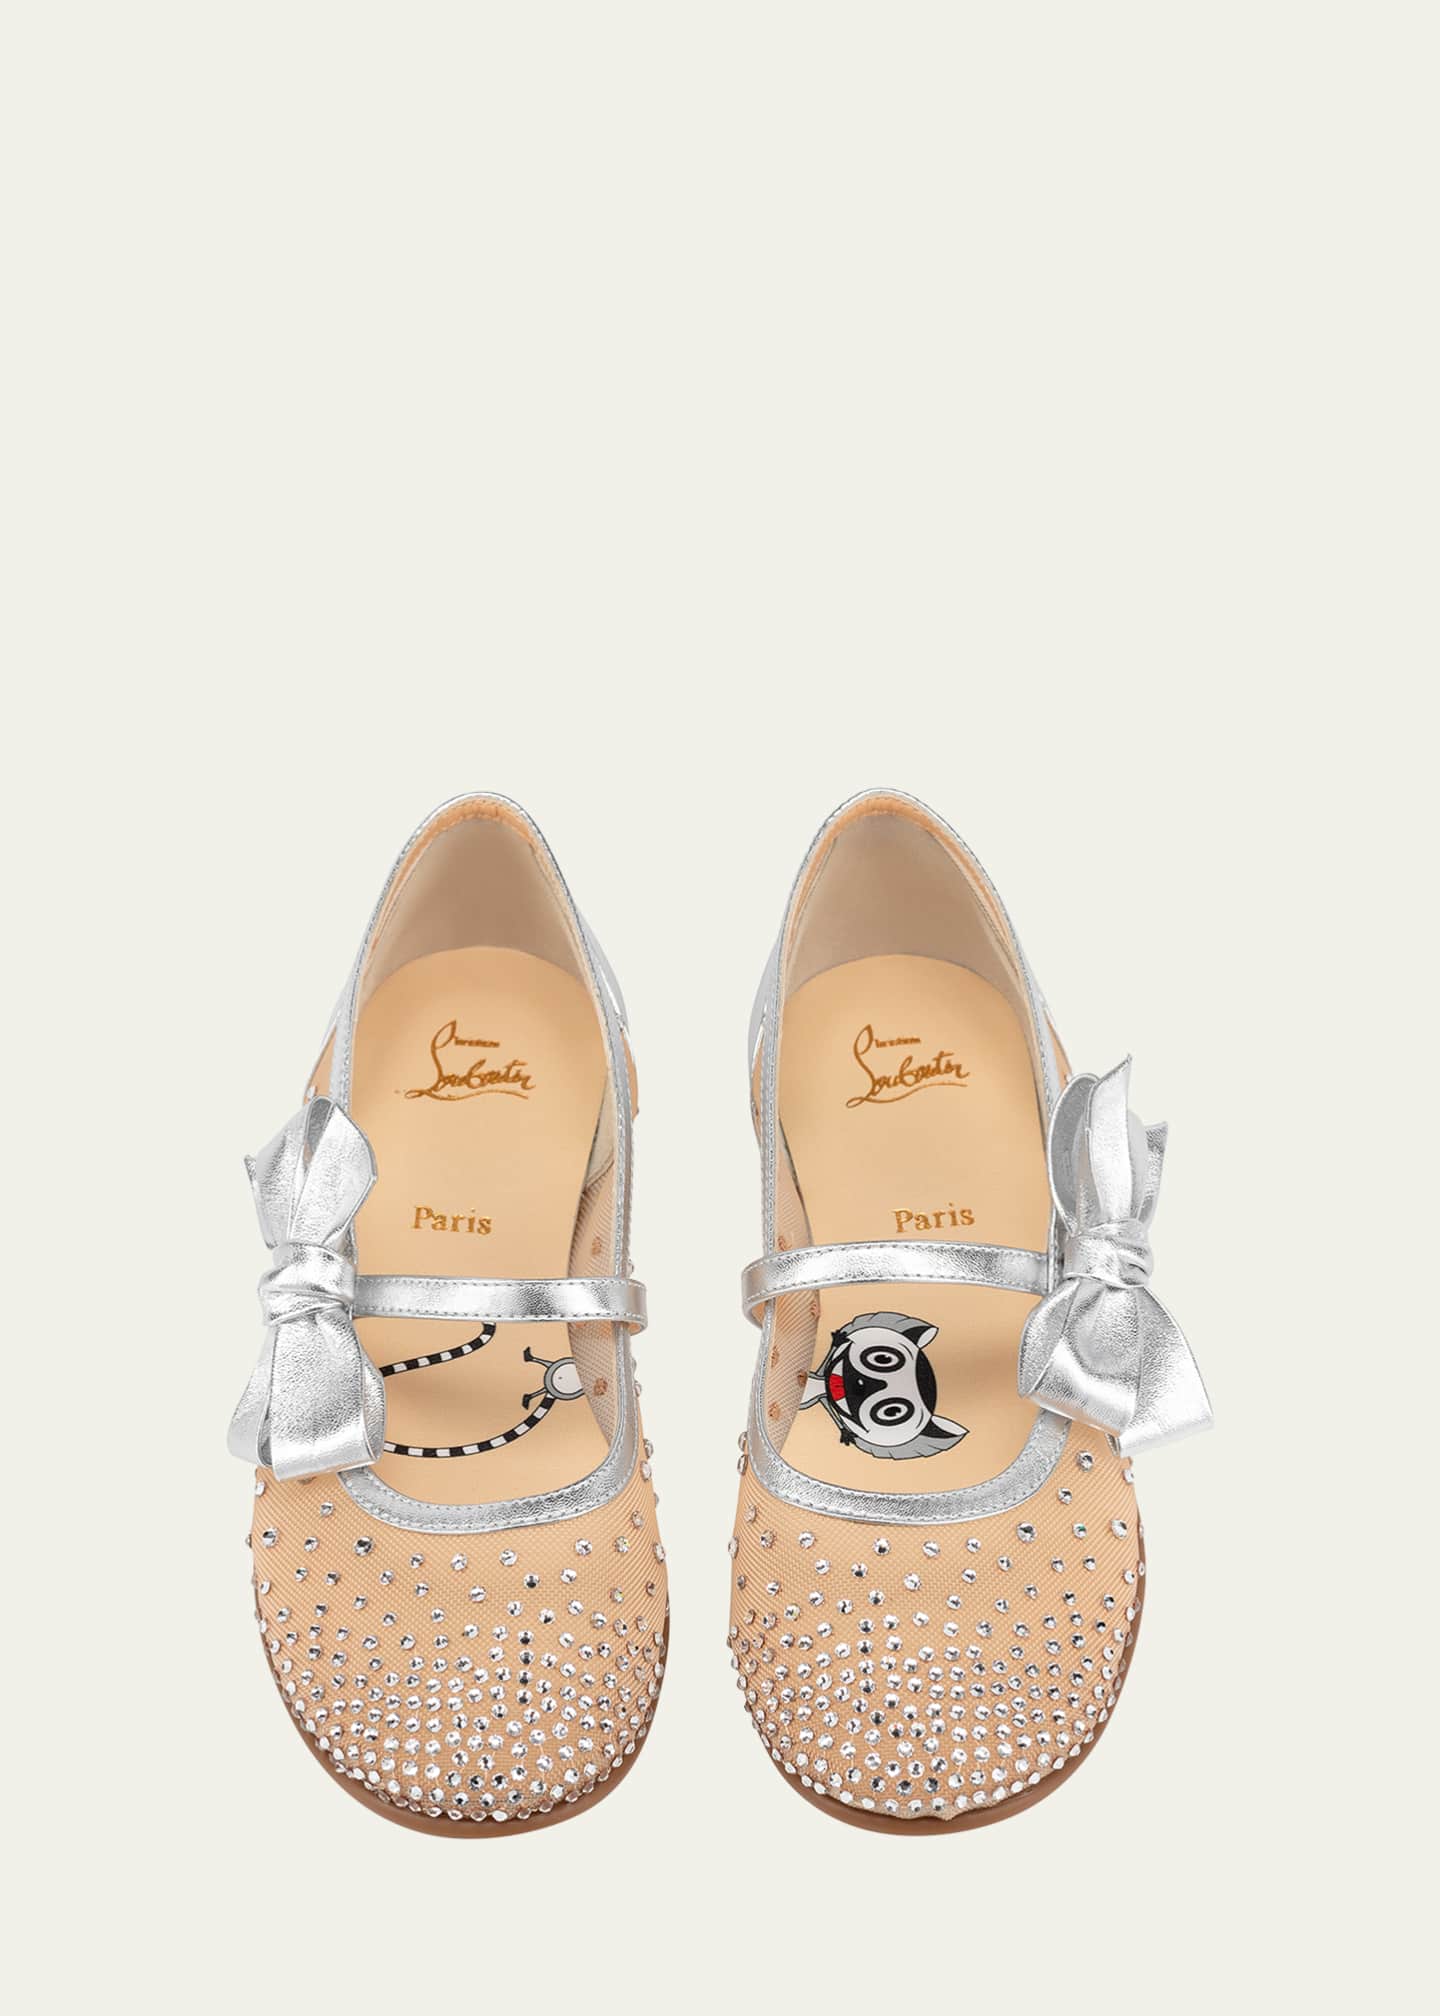 Christian Louboutin Girl's Melodie Strauss Embellished - Bergdorf